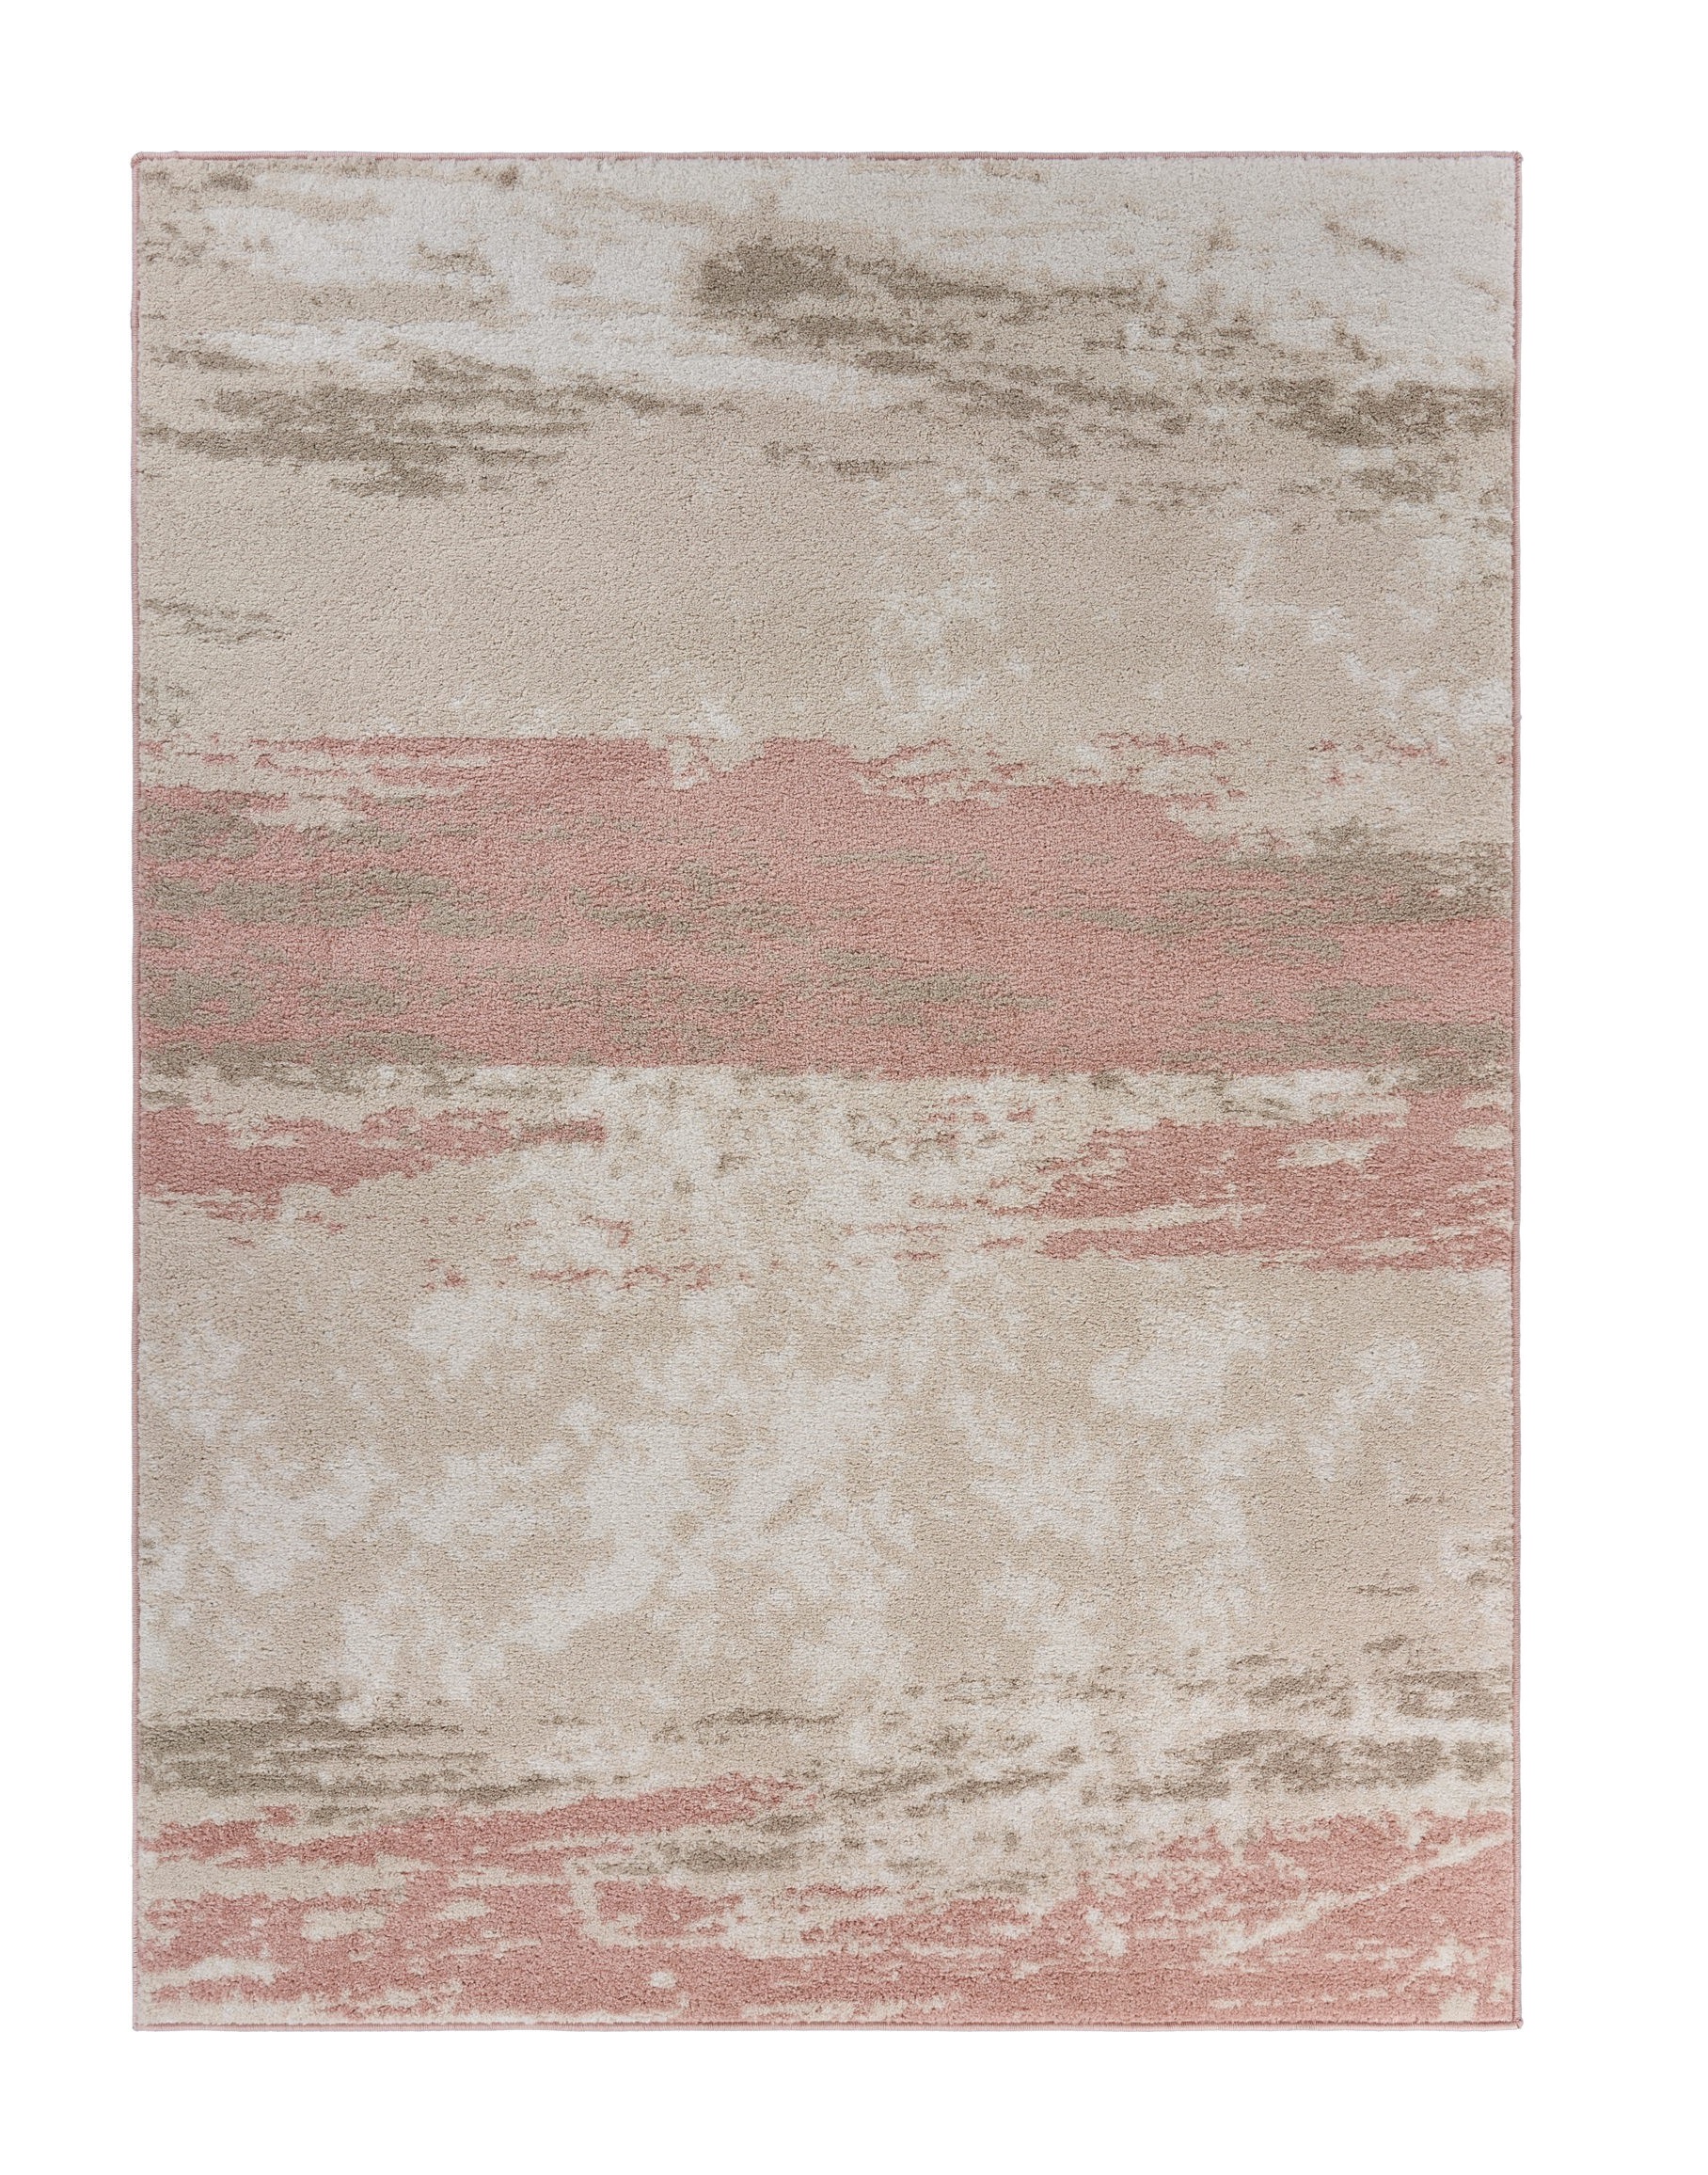 8’ x 10’ Blush and Beige Abstract Strokes Area Rug-395886-1